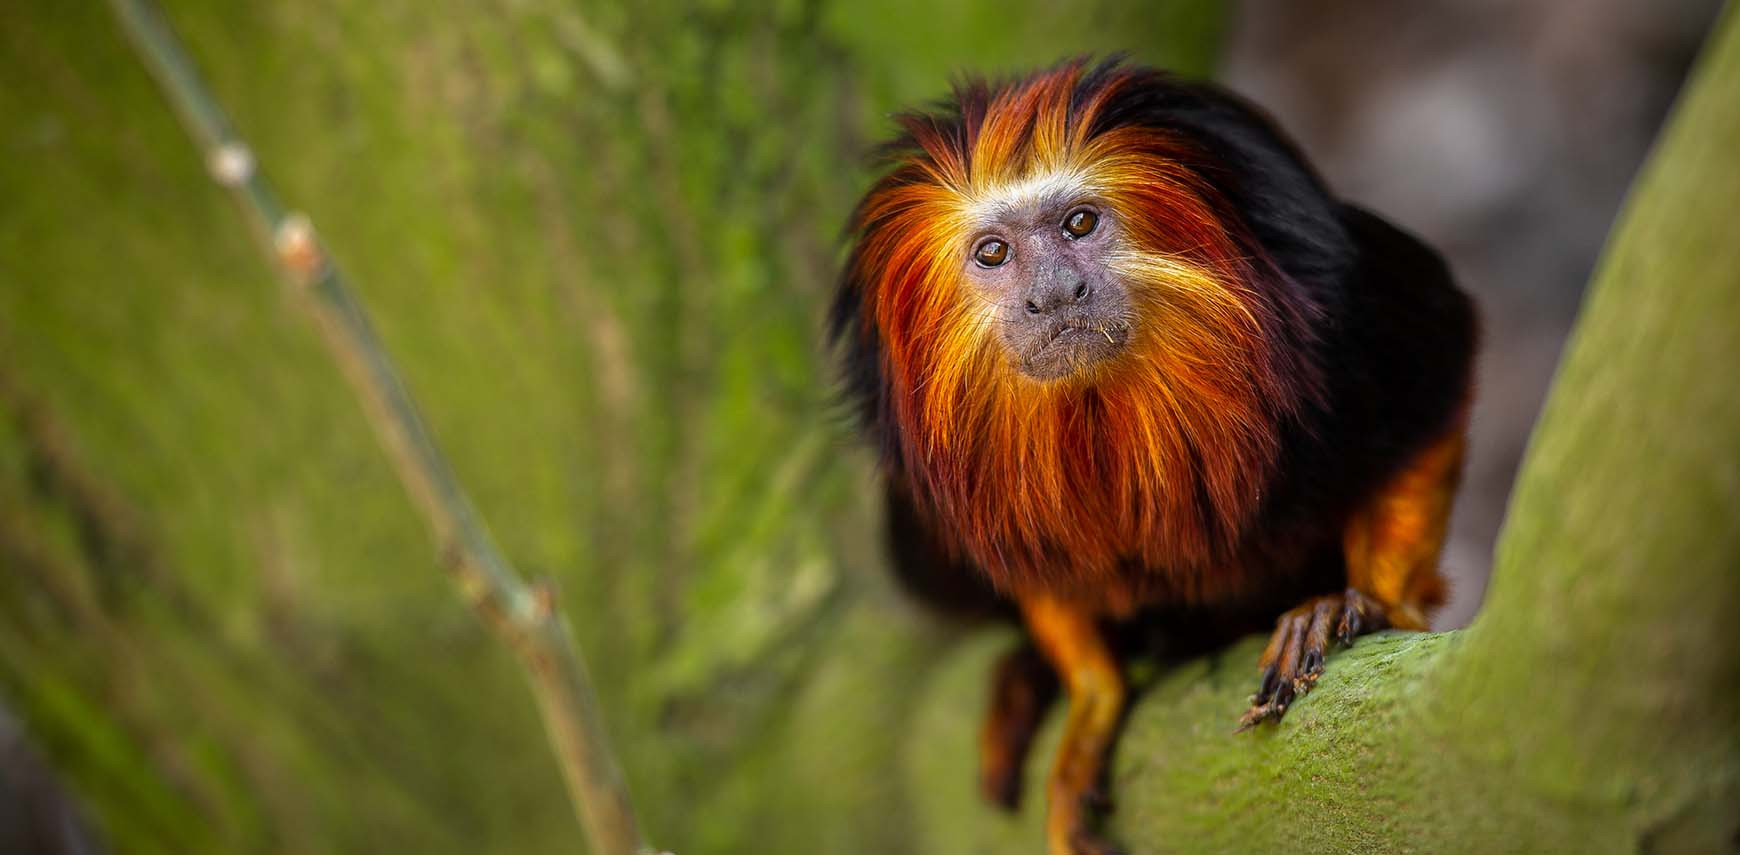 How chocolate can save the golden-headed lion tamarins